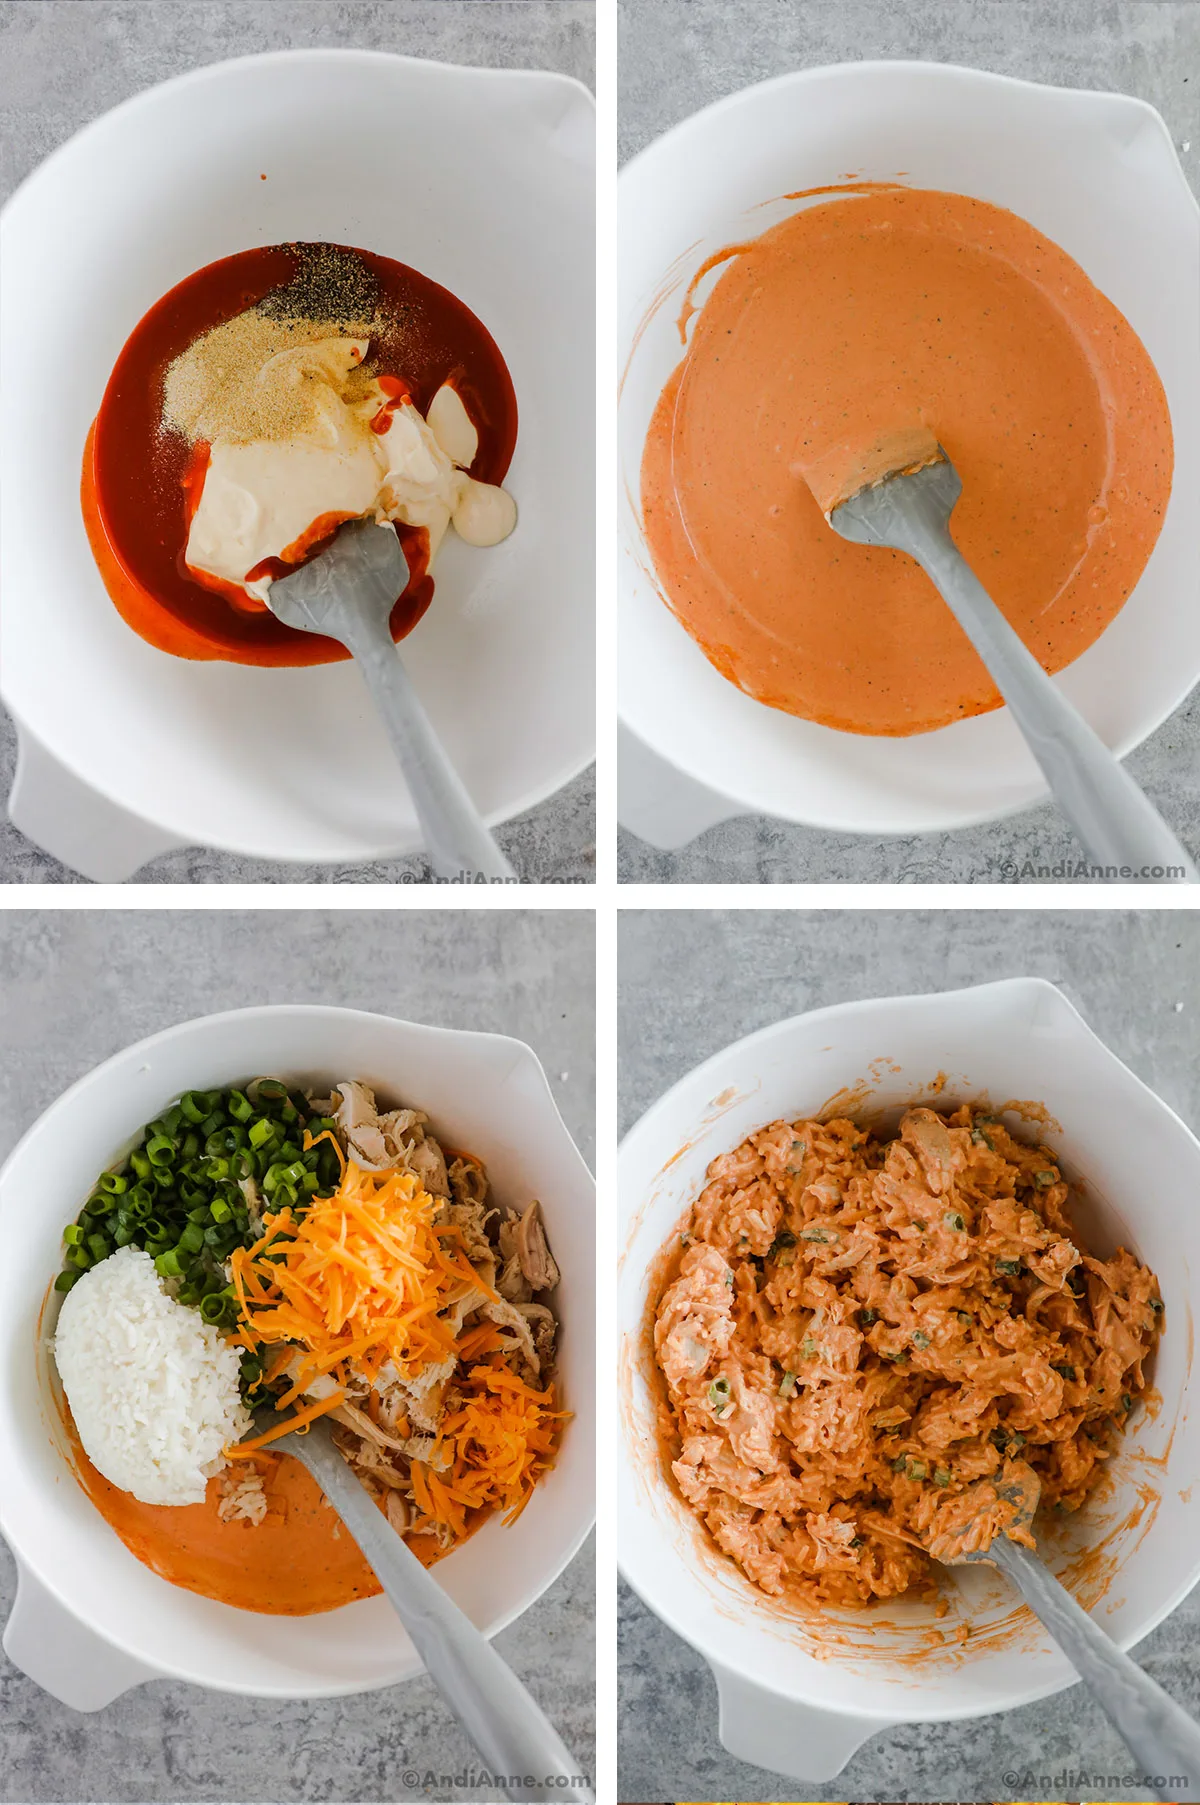 Four images of a bowl, first two are buffalo sauce and mayo unmixed then mixed. Second two are shredded cheese and other ingredients mixed into the buffalo sauce.